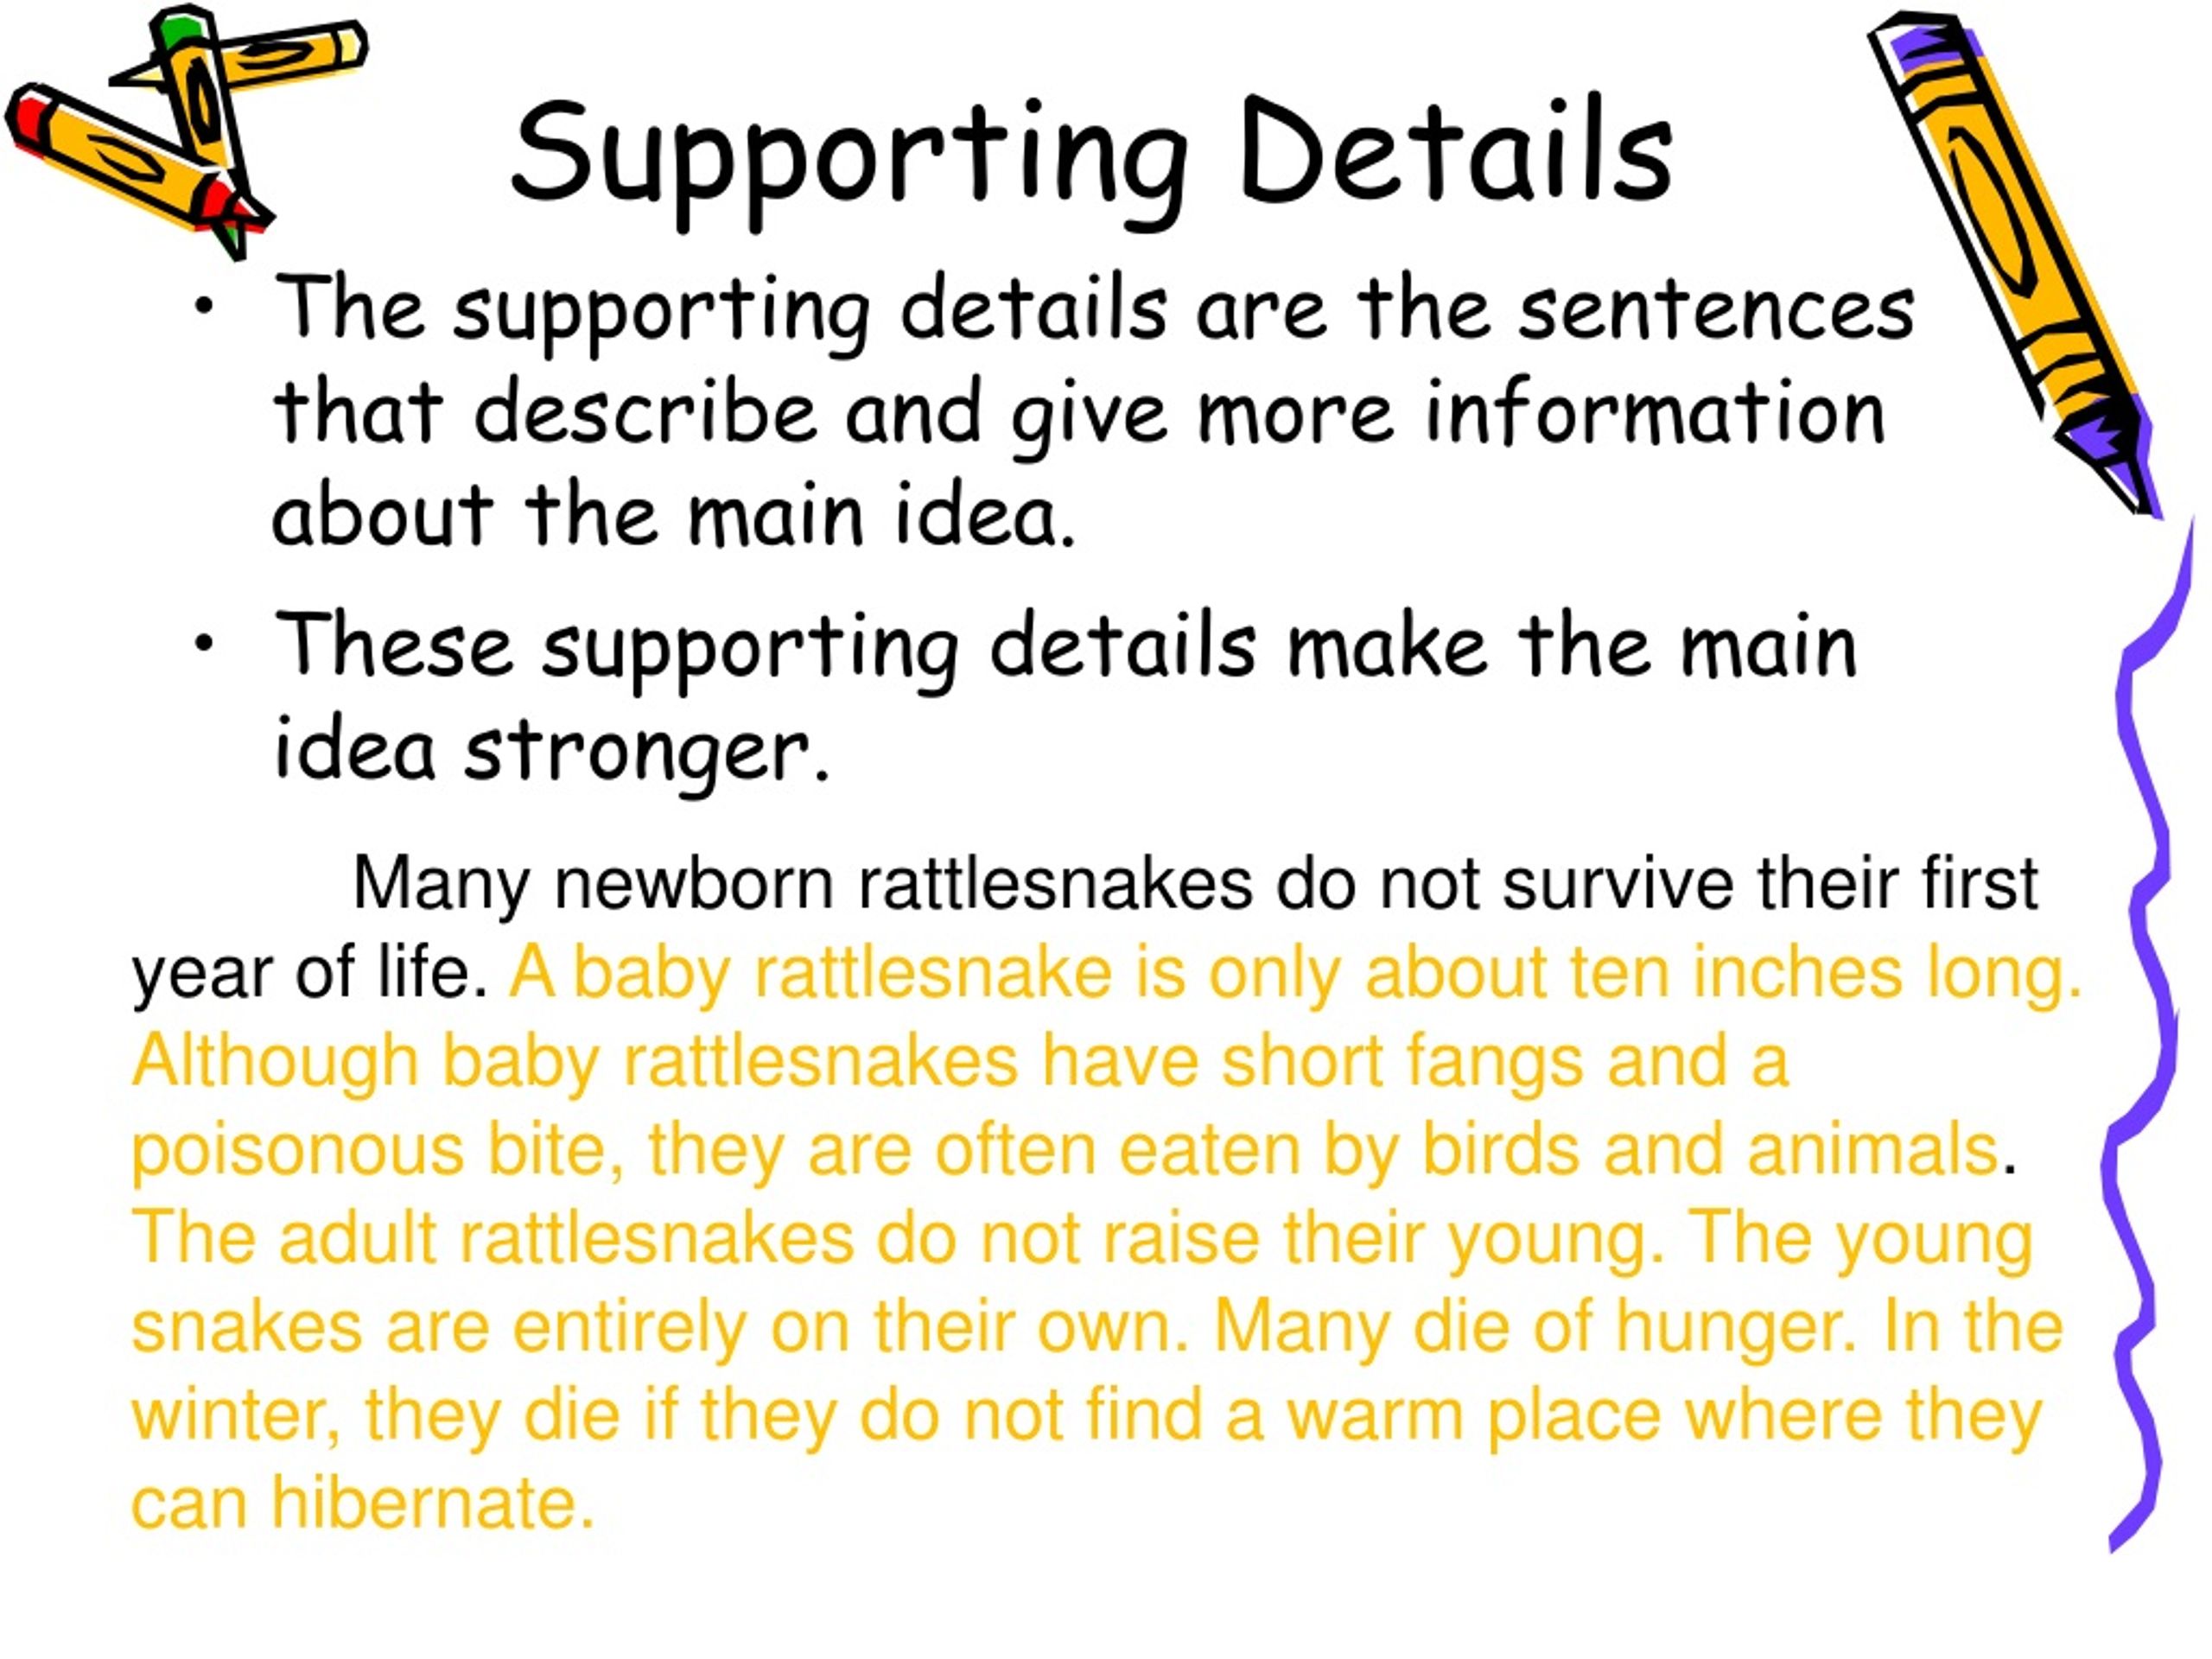 powerpoint presentation on main idea and supporting details